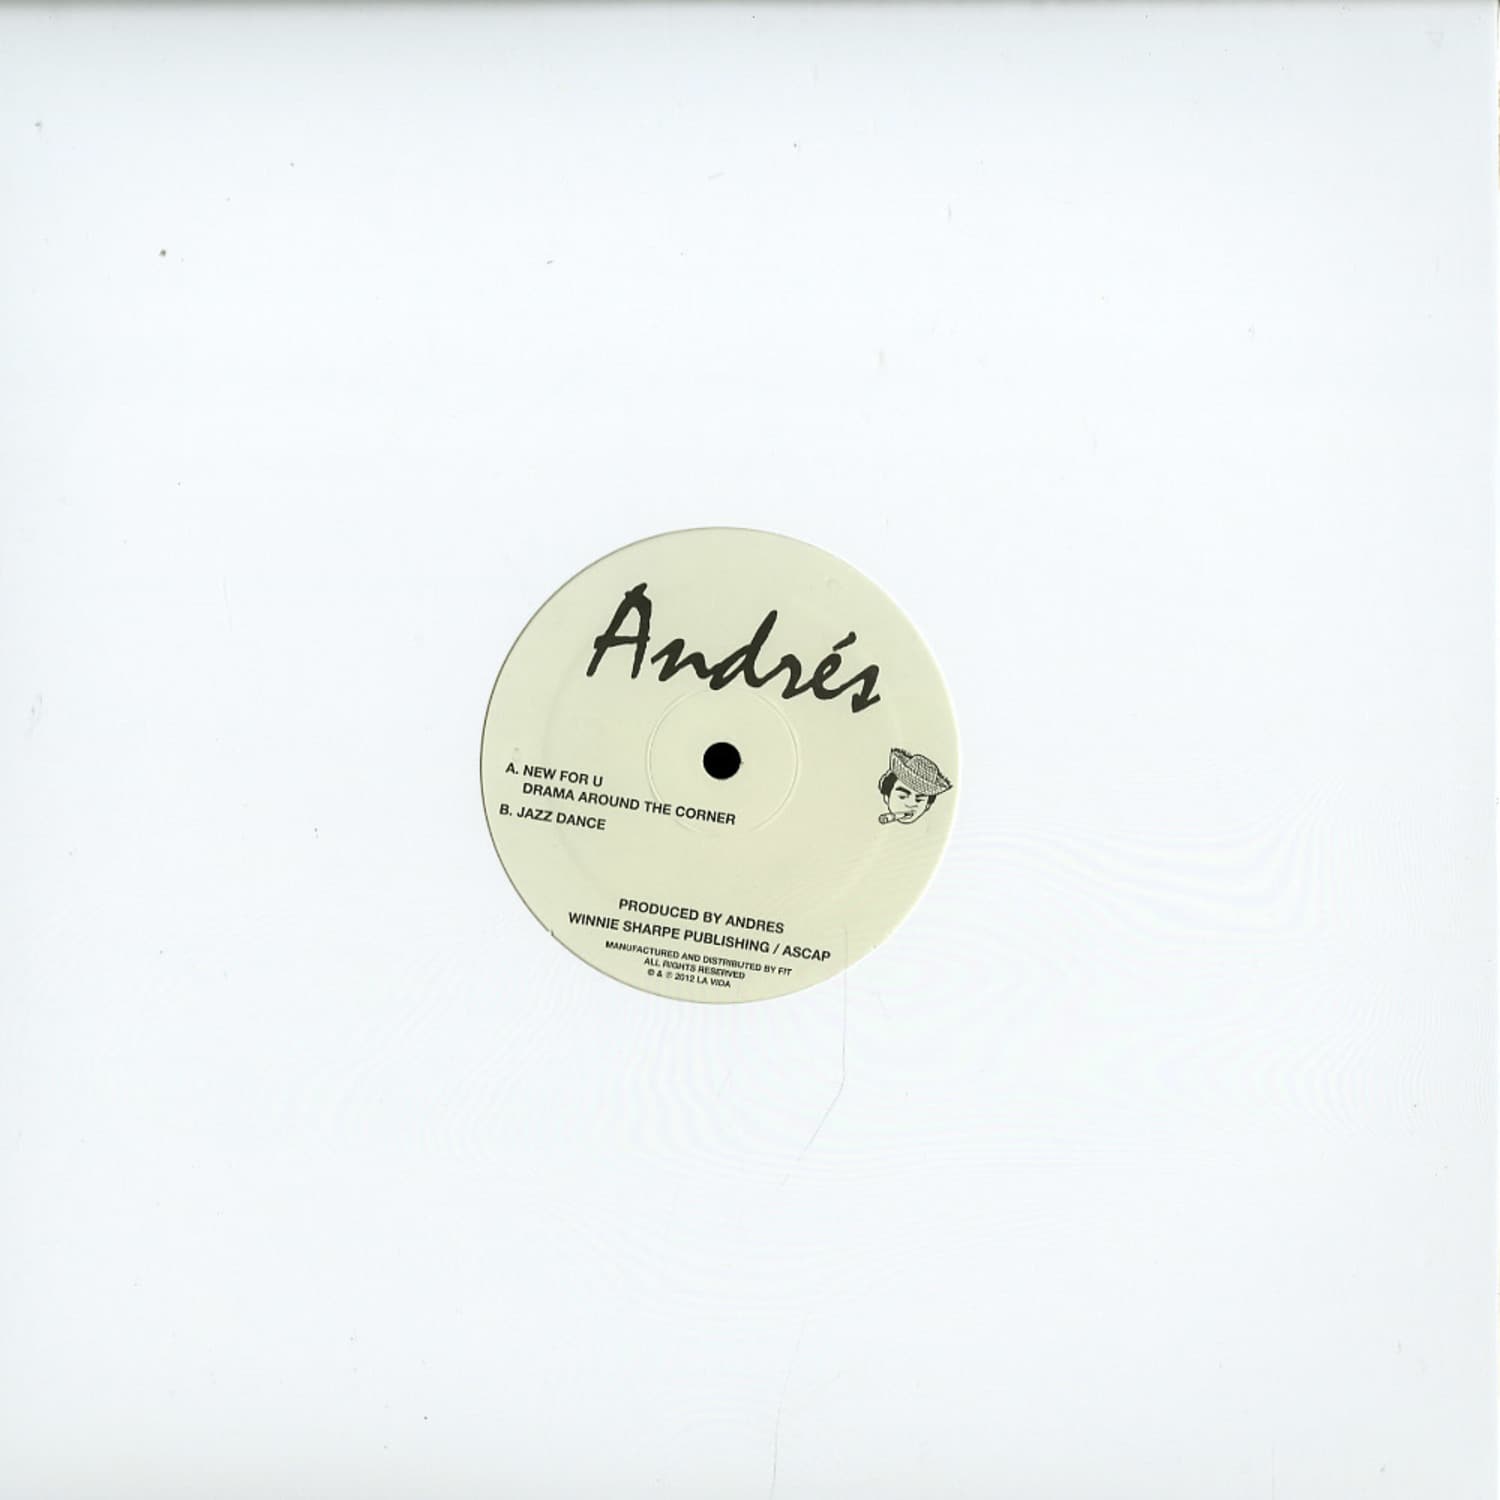 Andres - NEW FOR YOU 